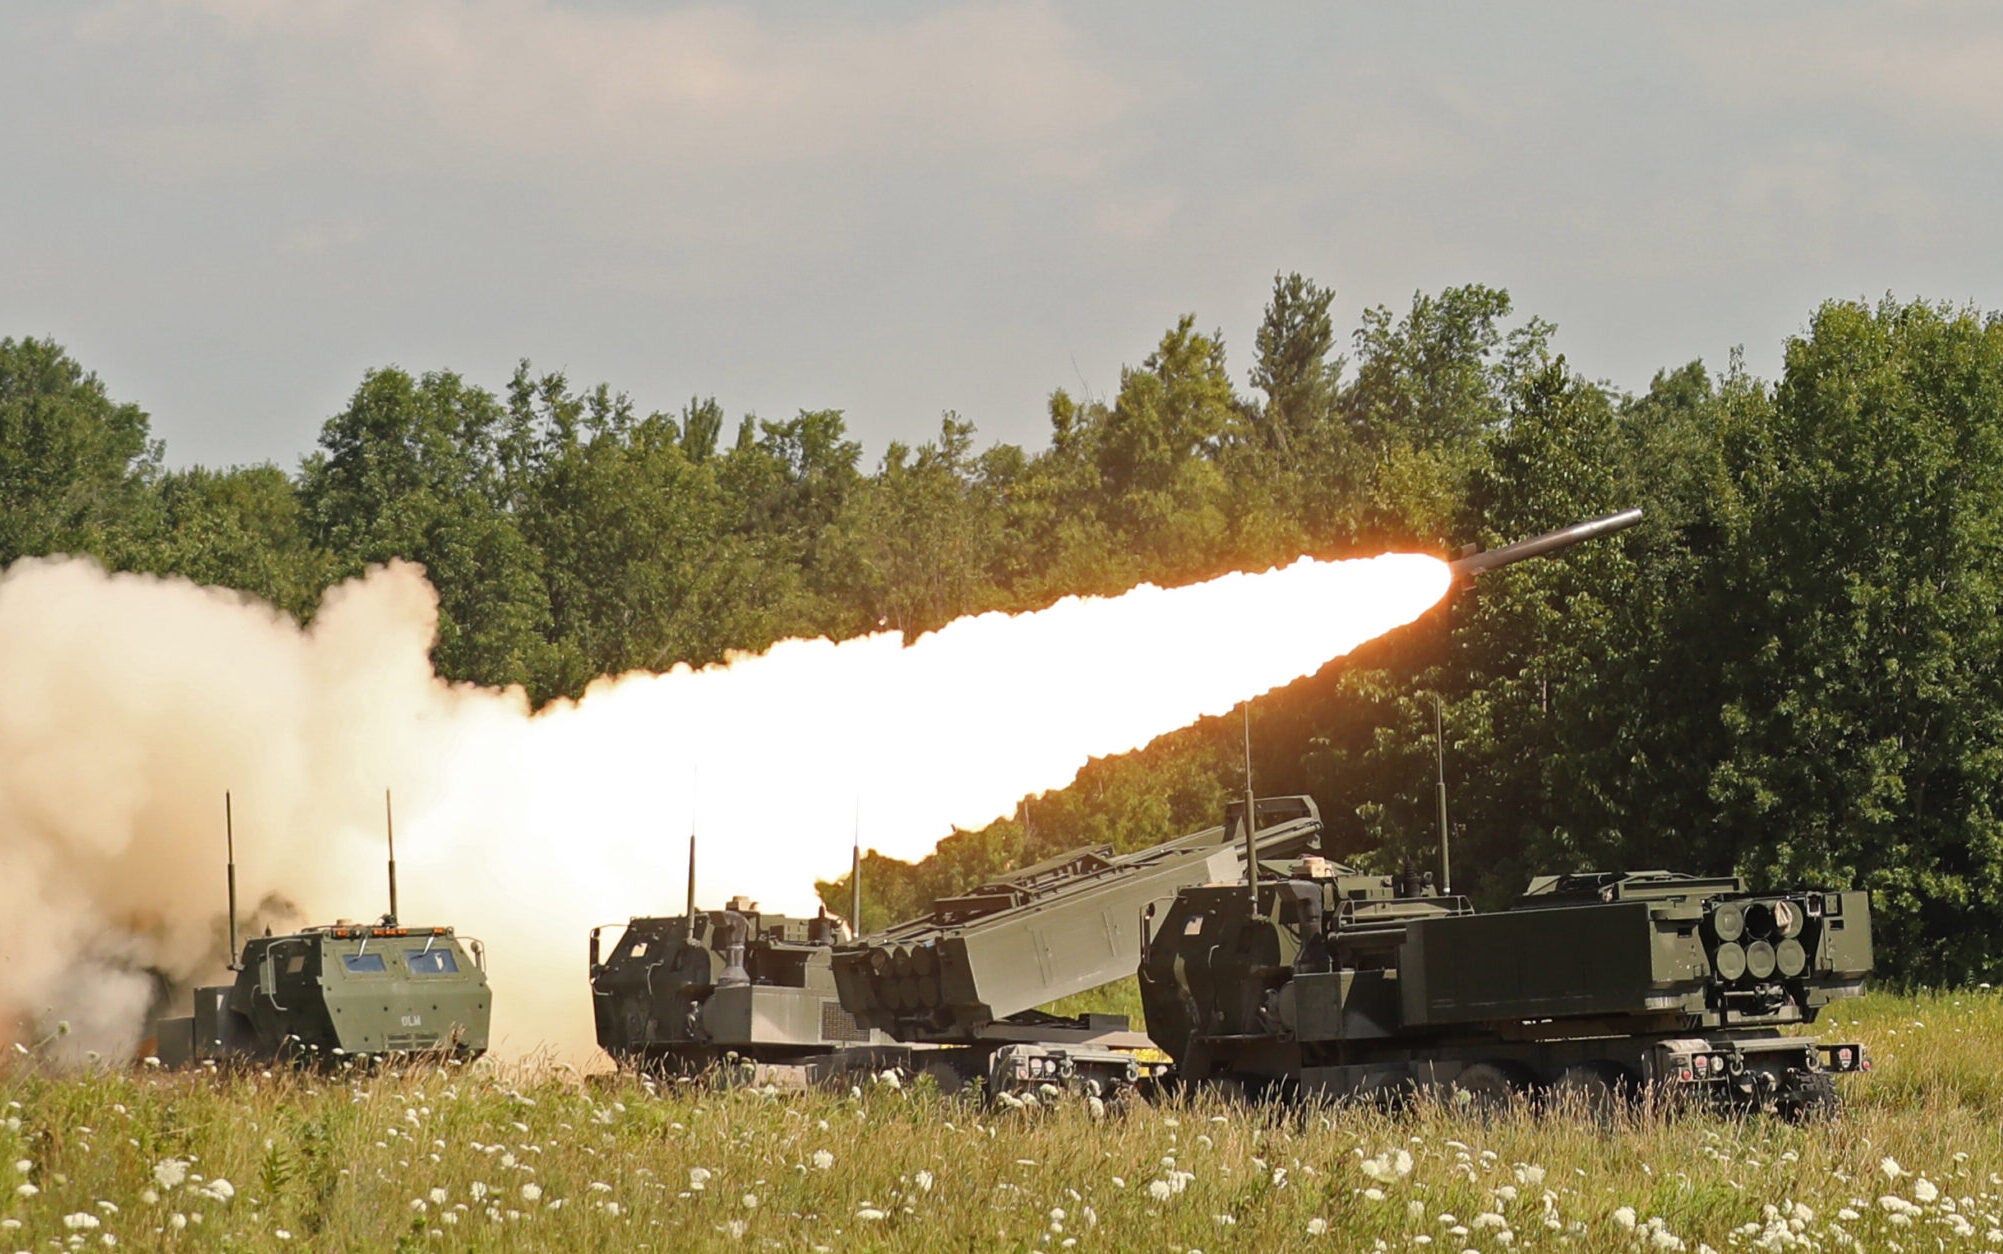 197 Field Artillery Regiment of New Hampshire fires rockets at Fort Drum in preparation for an upcoming deployment. U.S&gt; Army Photo by Sgt. 1st Class Richard Frost